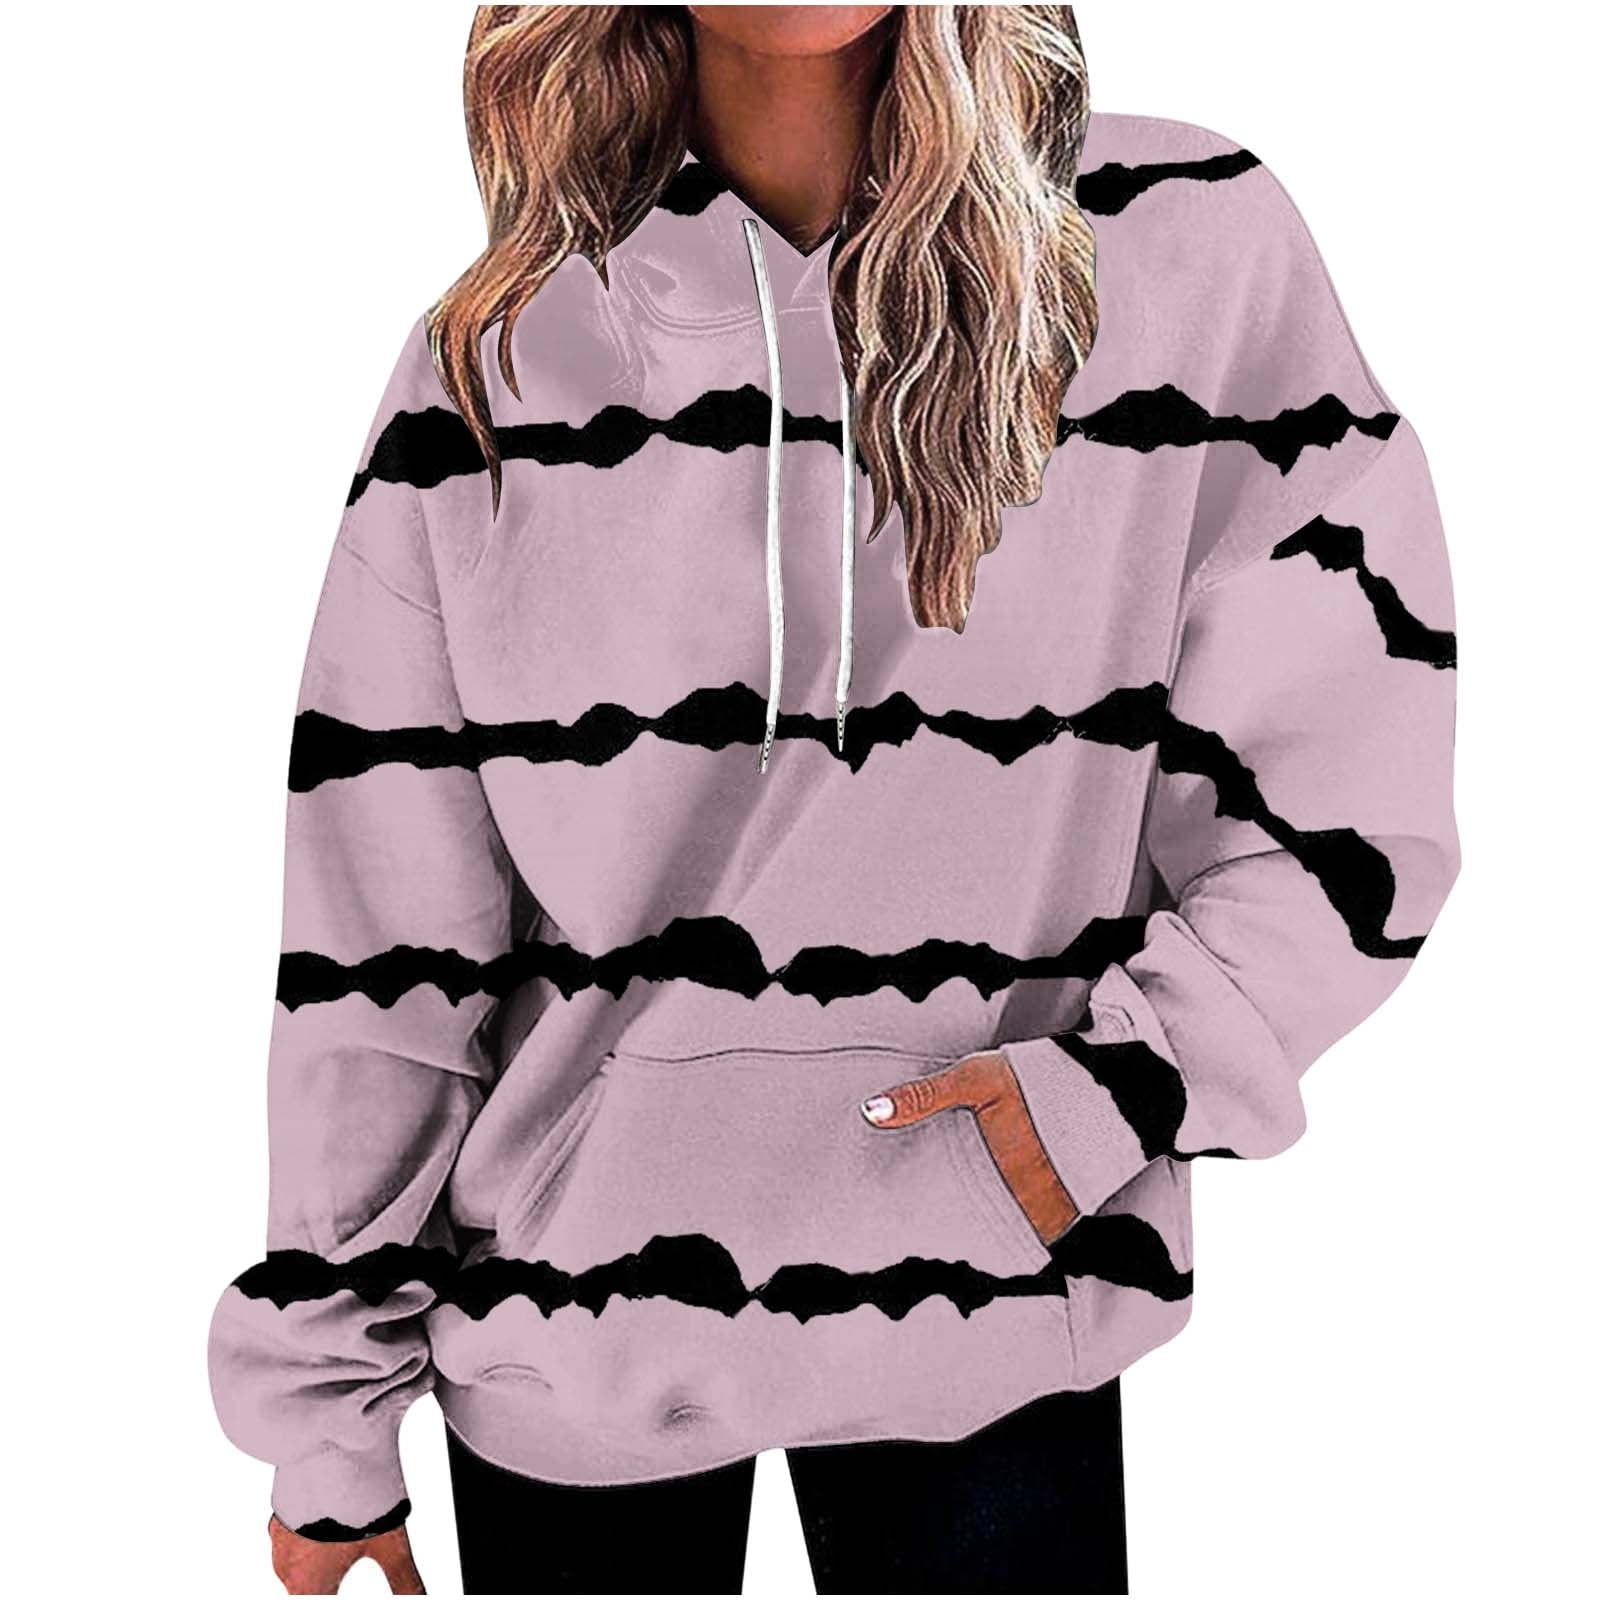 RQYYD Women's Color Block Drawstring Hoodies Pullover Lightweight Long  Sleeve Tops Casual Loose Striped Hooded Sweatshirt with Kangaroo Pocket Pink  XXL 